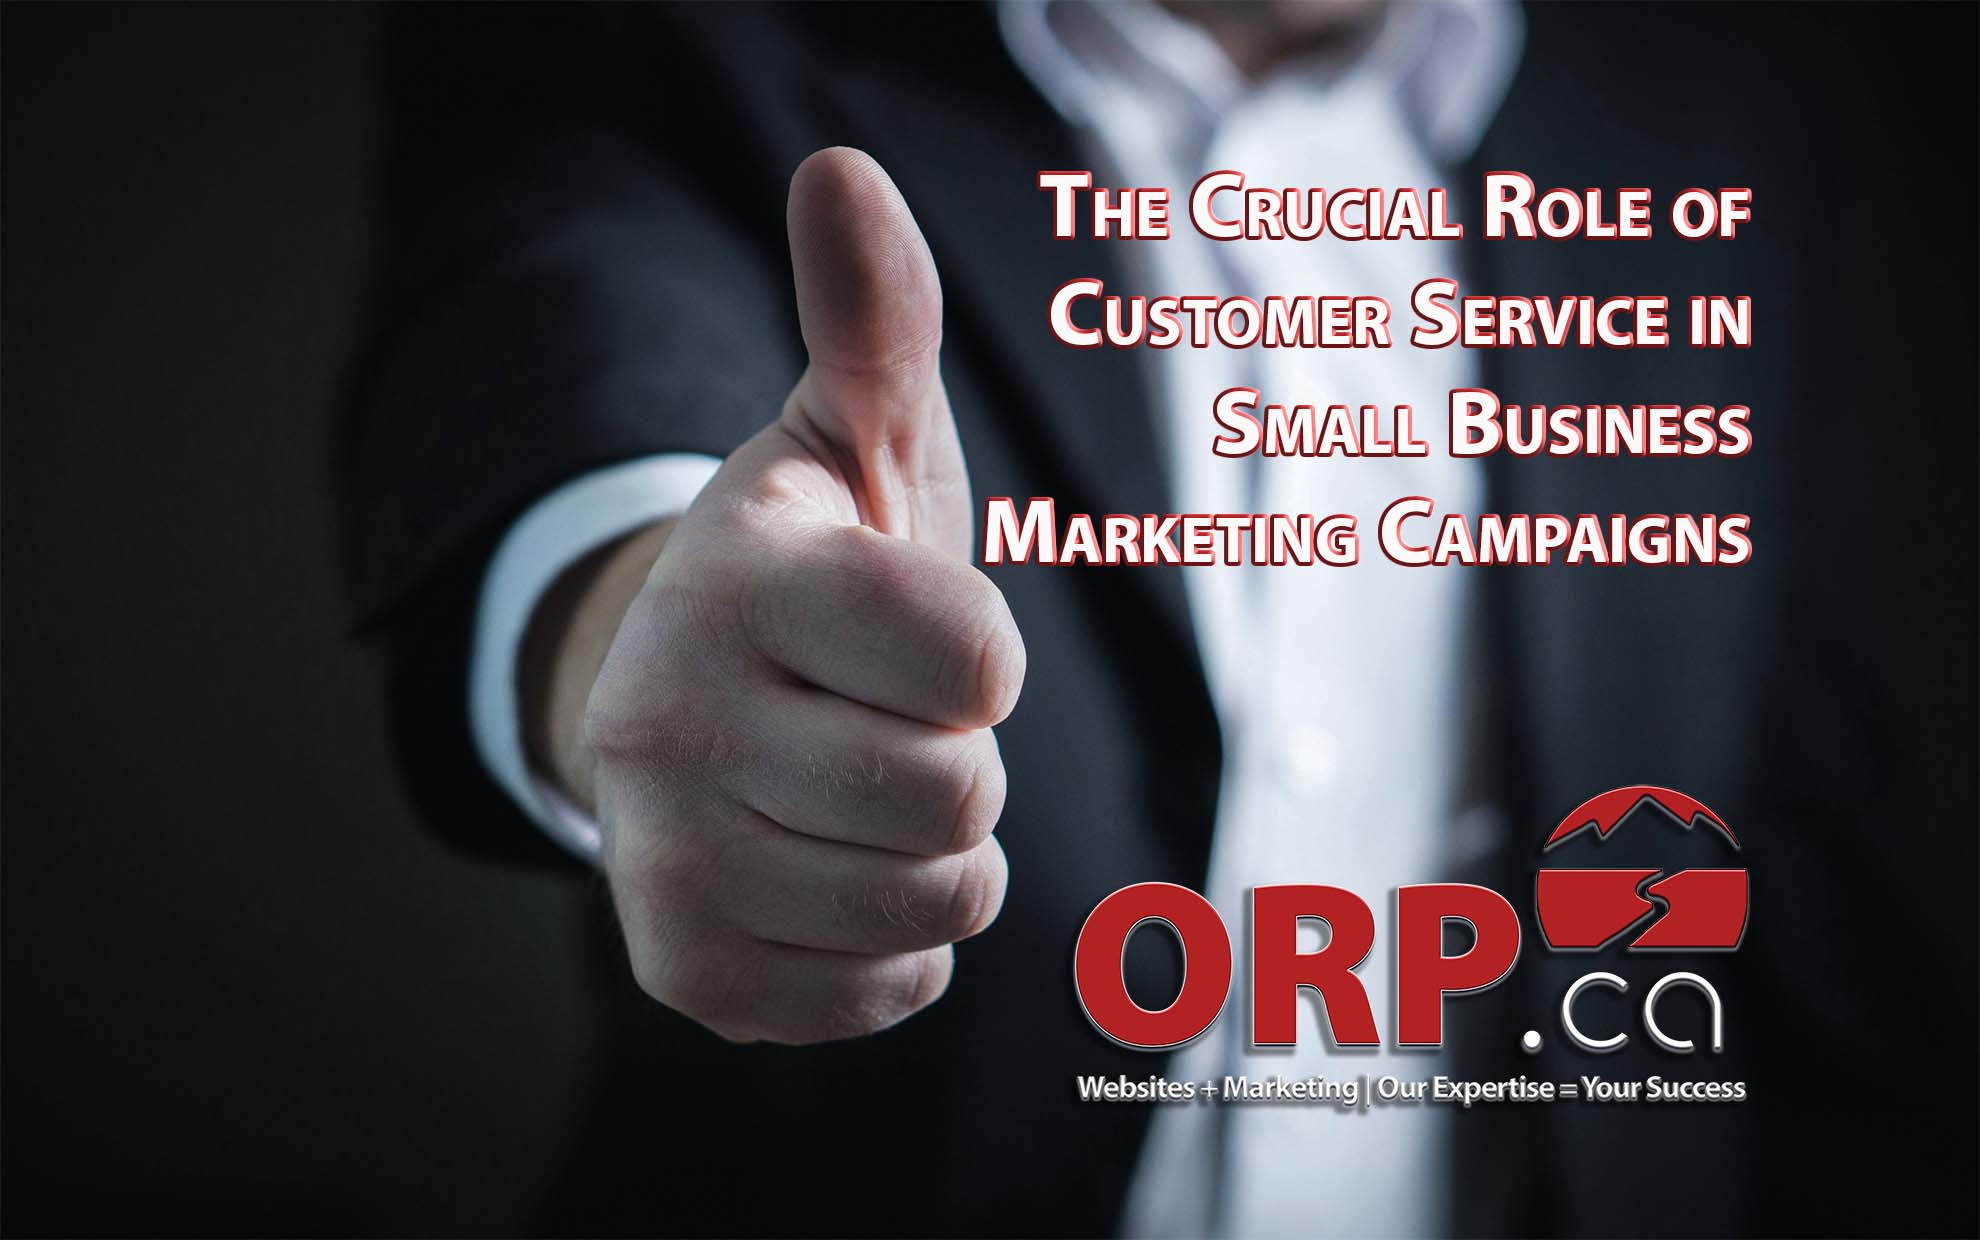 The Crucial Role of Customer Service in Small Business Marketing Campaigns - a small business marketing article from the Team @ ORP.ca - Website Design and Development, Copywriting and Digital Marketing Services